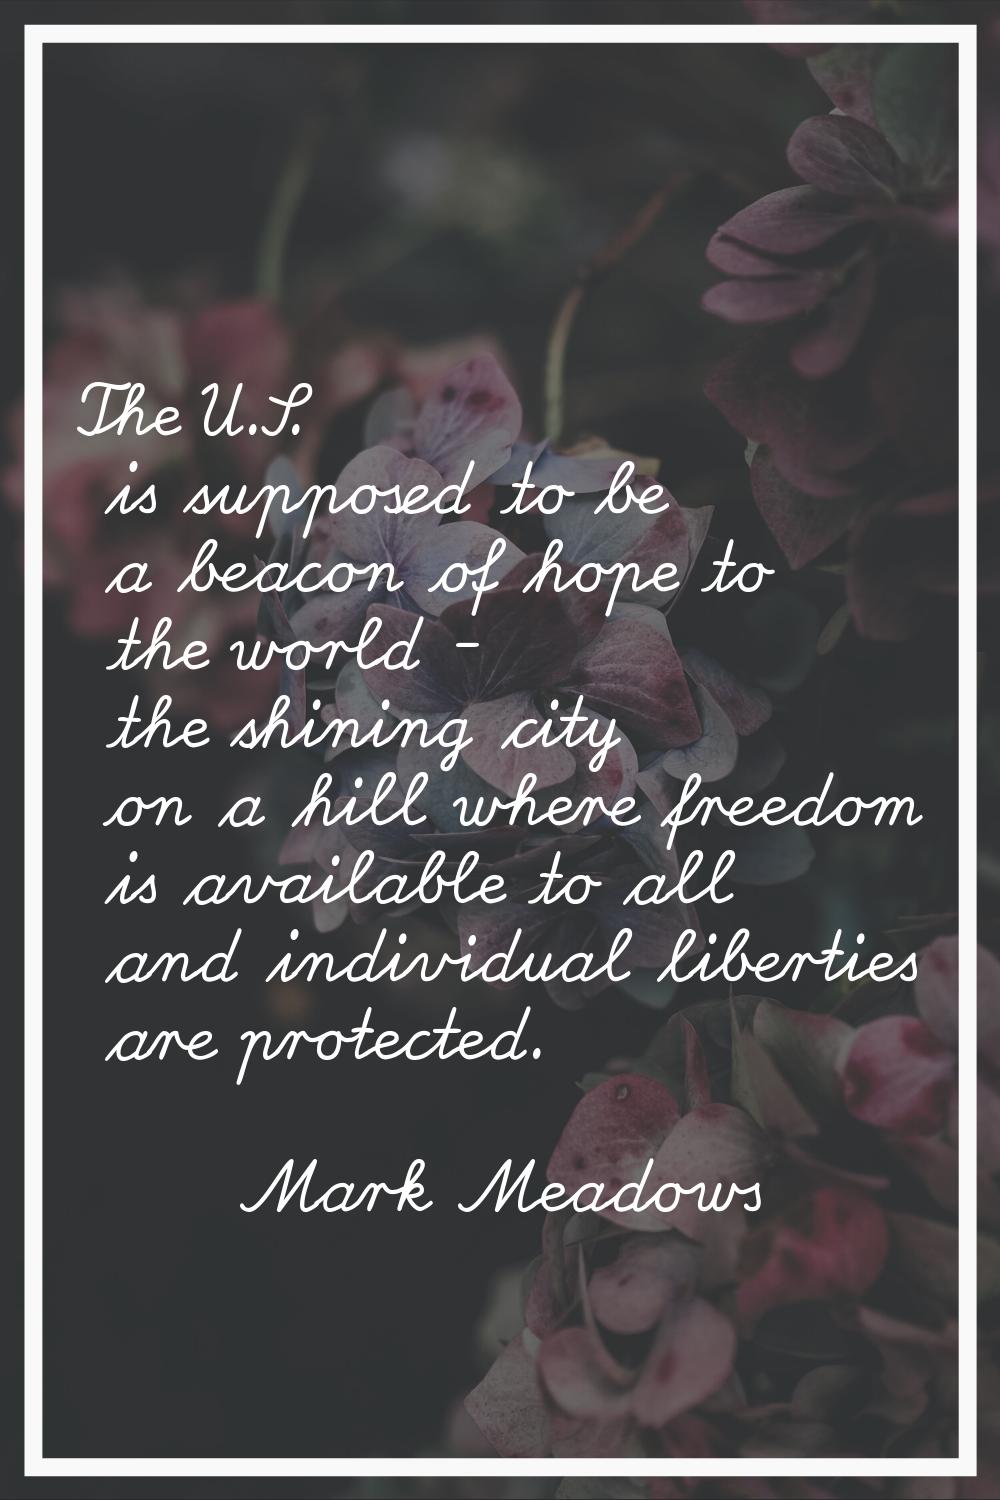 The U.S. is supposed to be a beacon of hope to the world - the shining city on a hill where freedom